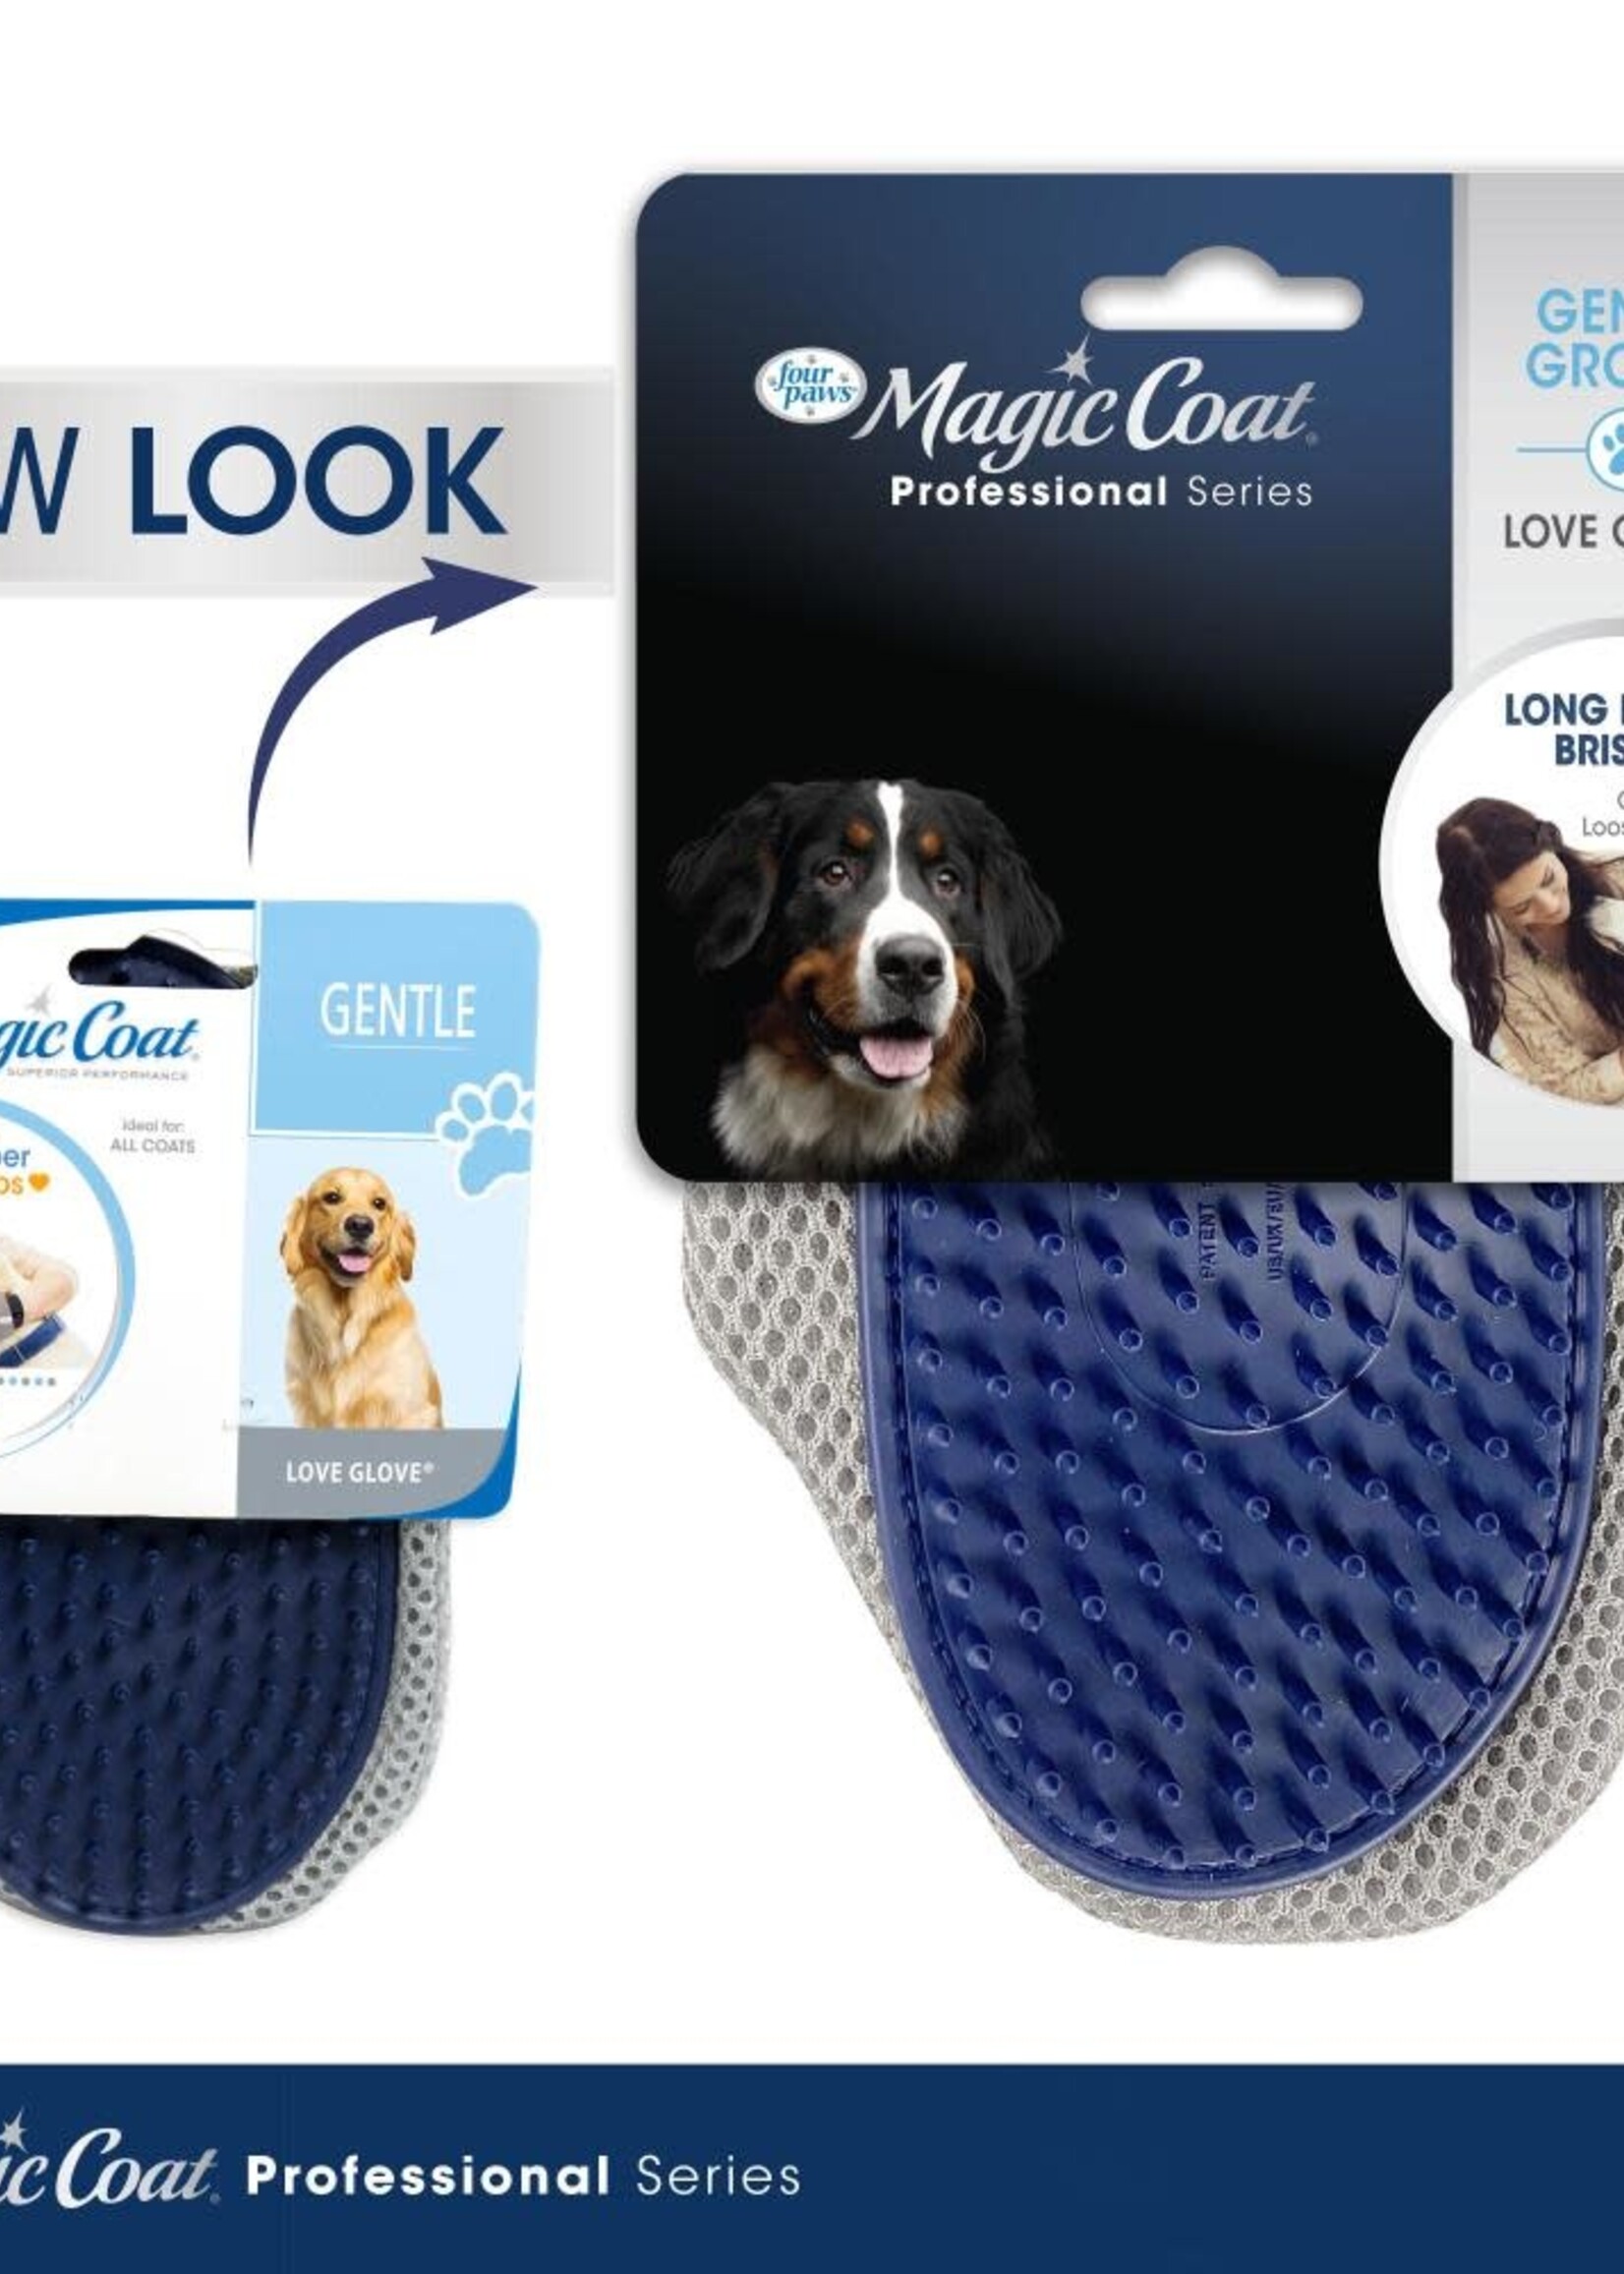 Four Paws Four Paws Magic Coat Professional Series Love Glove Dog Grooming Glove